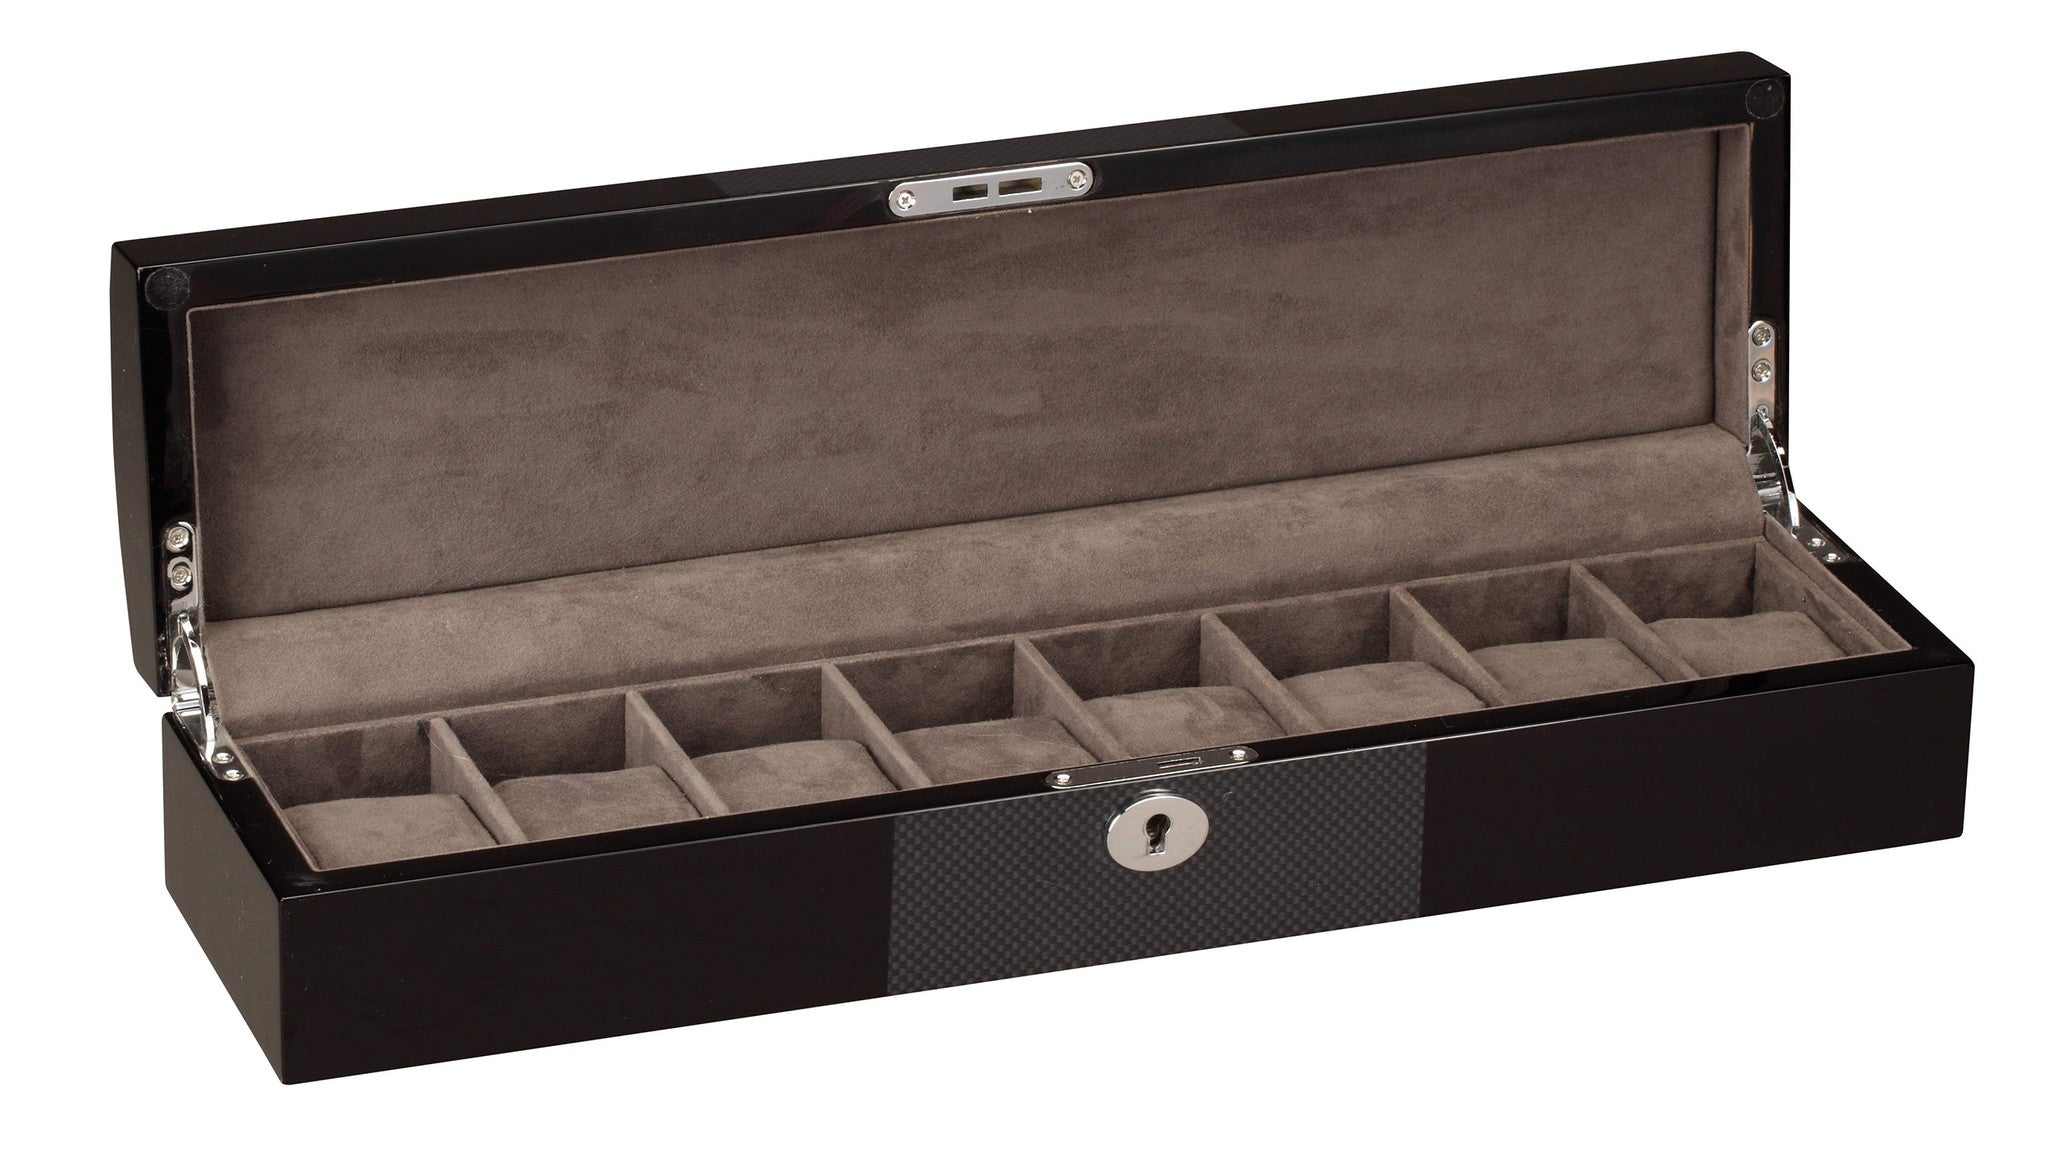 Diplomat 8 Piano Black Wood Watch Box With Carbon Fiber Accent